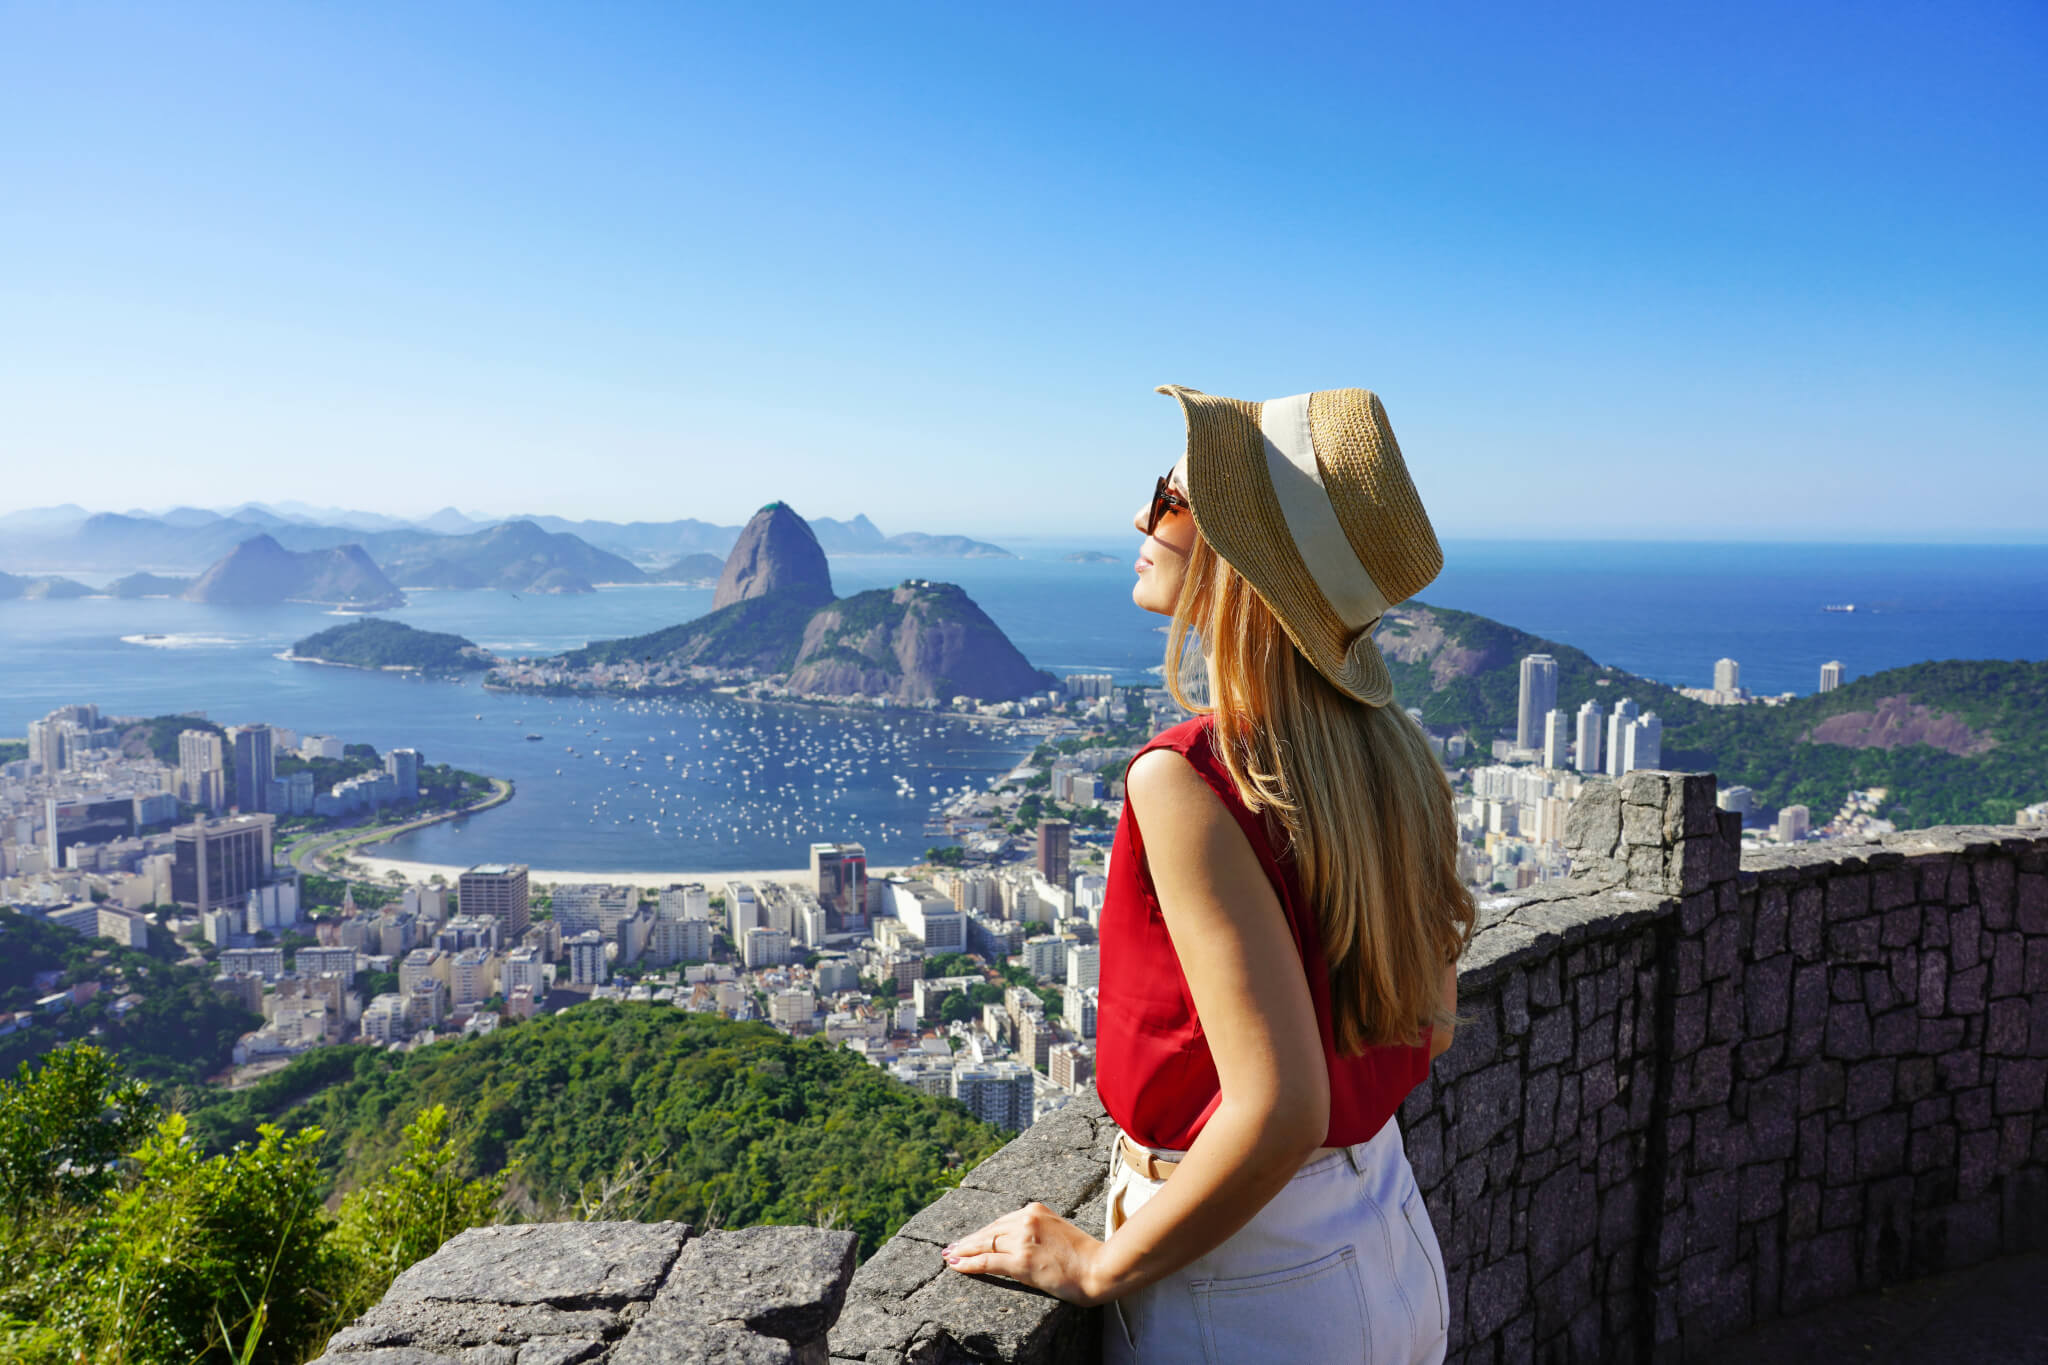 Fashion tourist woman on terrace in Rio de Janeiro with the famous Guanabara bay and the cityscape of Rio de Janerio, Brazil